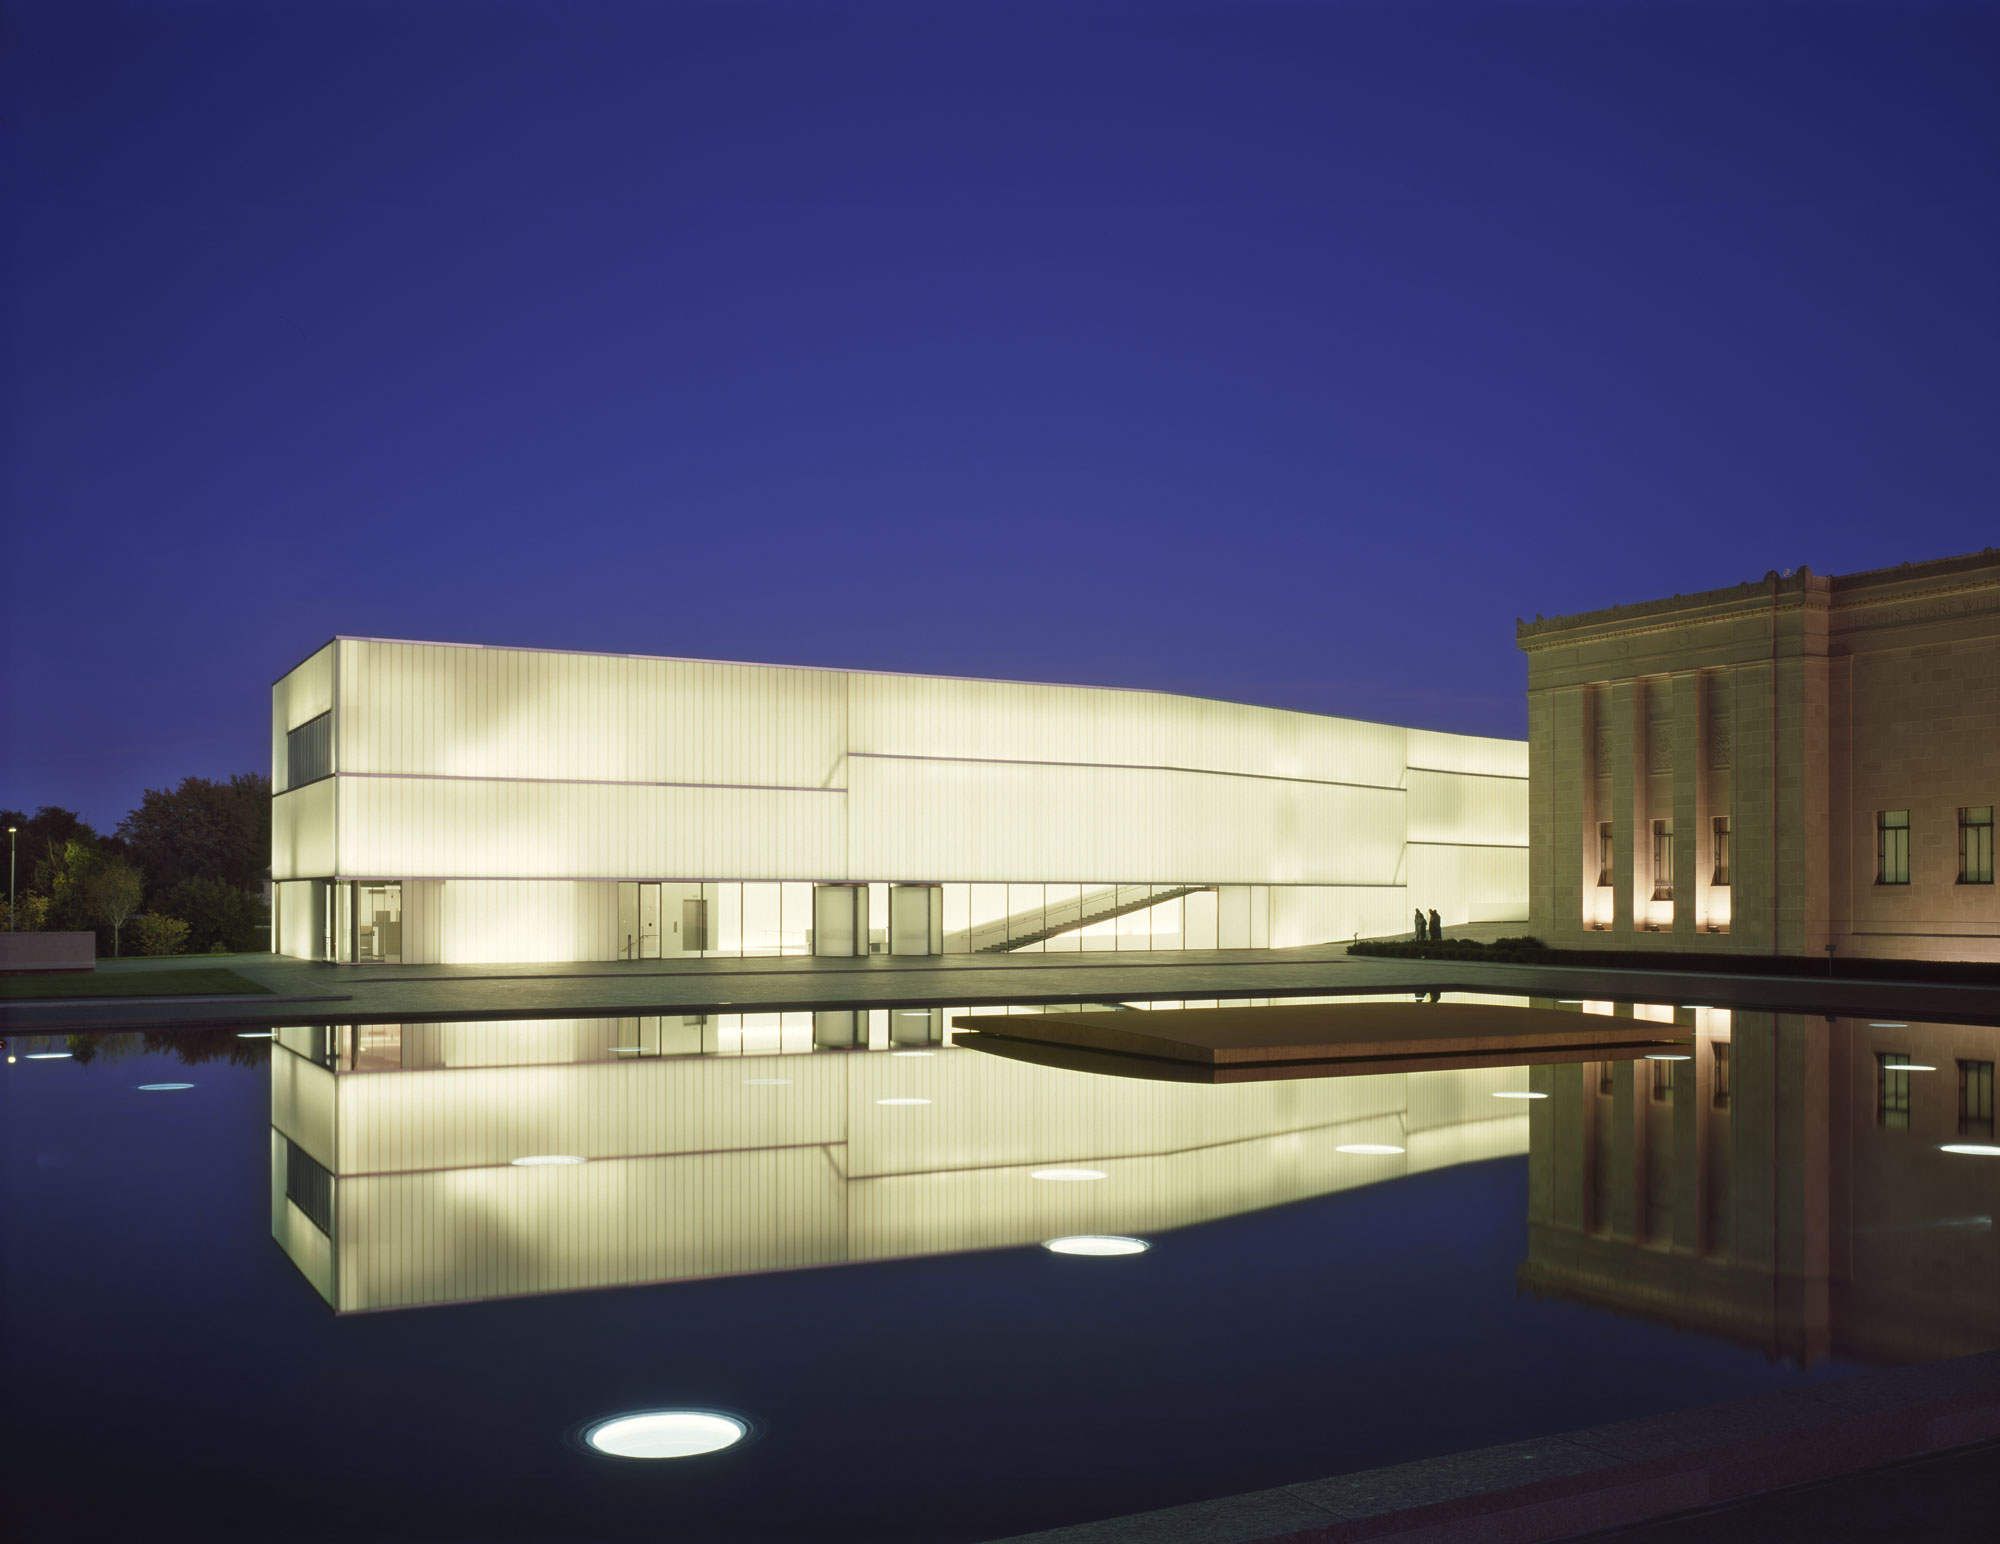 The Nelson-Atkins Museum of Art introduced Bendheim’s Lamberts® channel glass to North America. It is the key design element of Steven Holl’s Bloch Building addition. Photo by Roland Halbe.